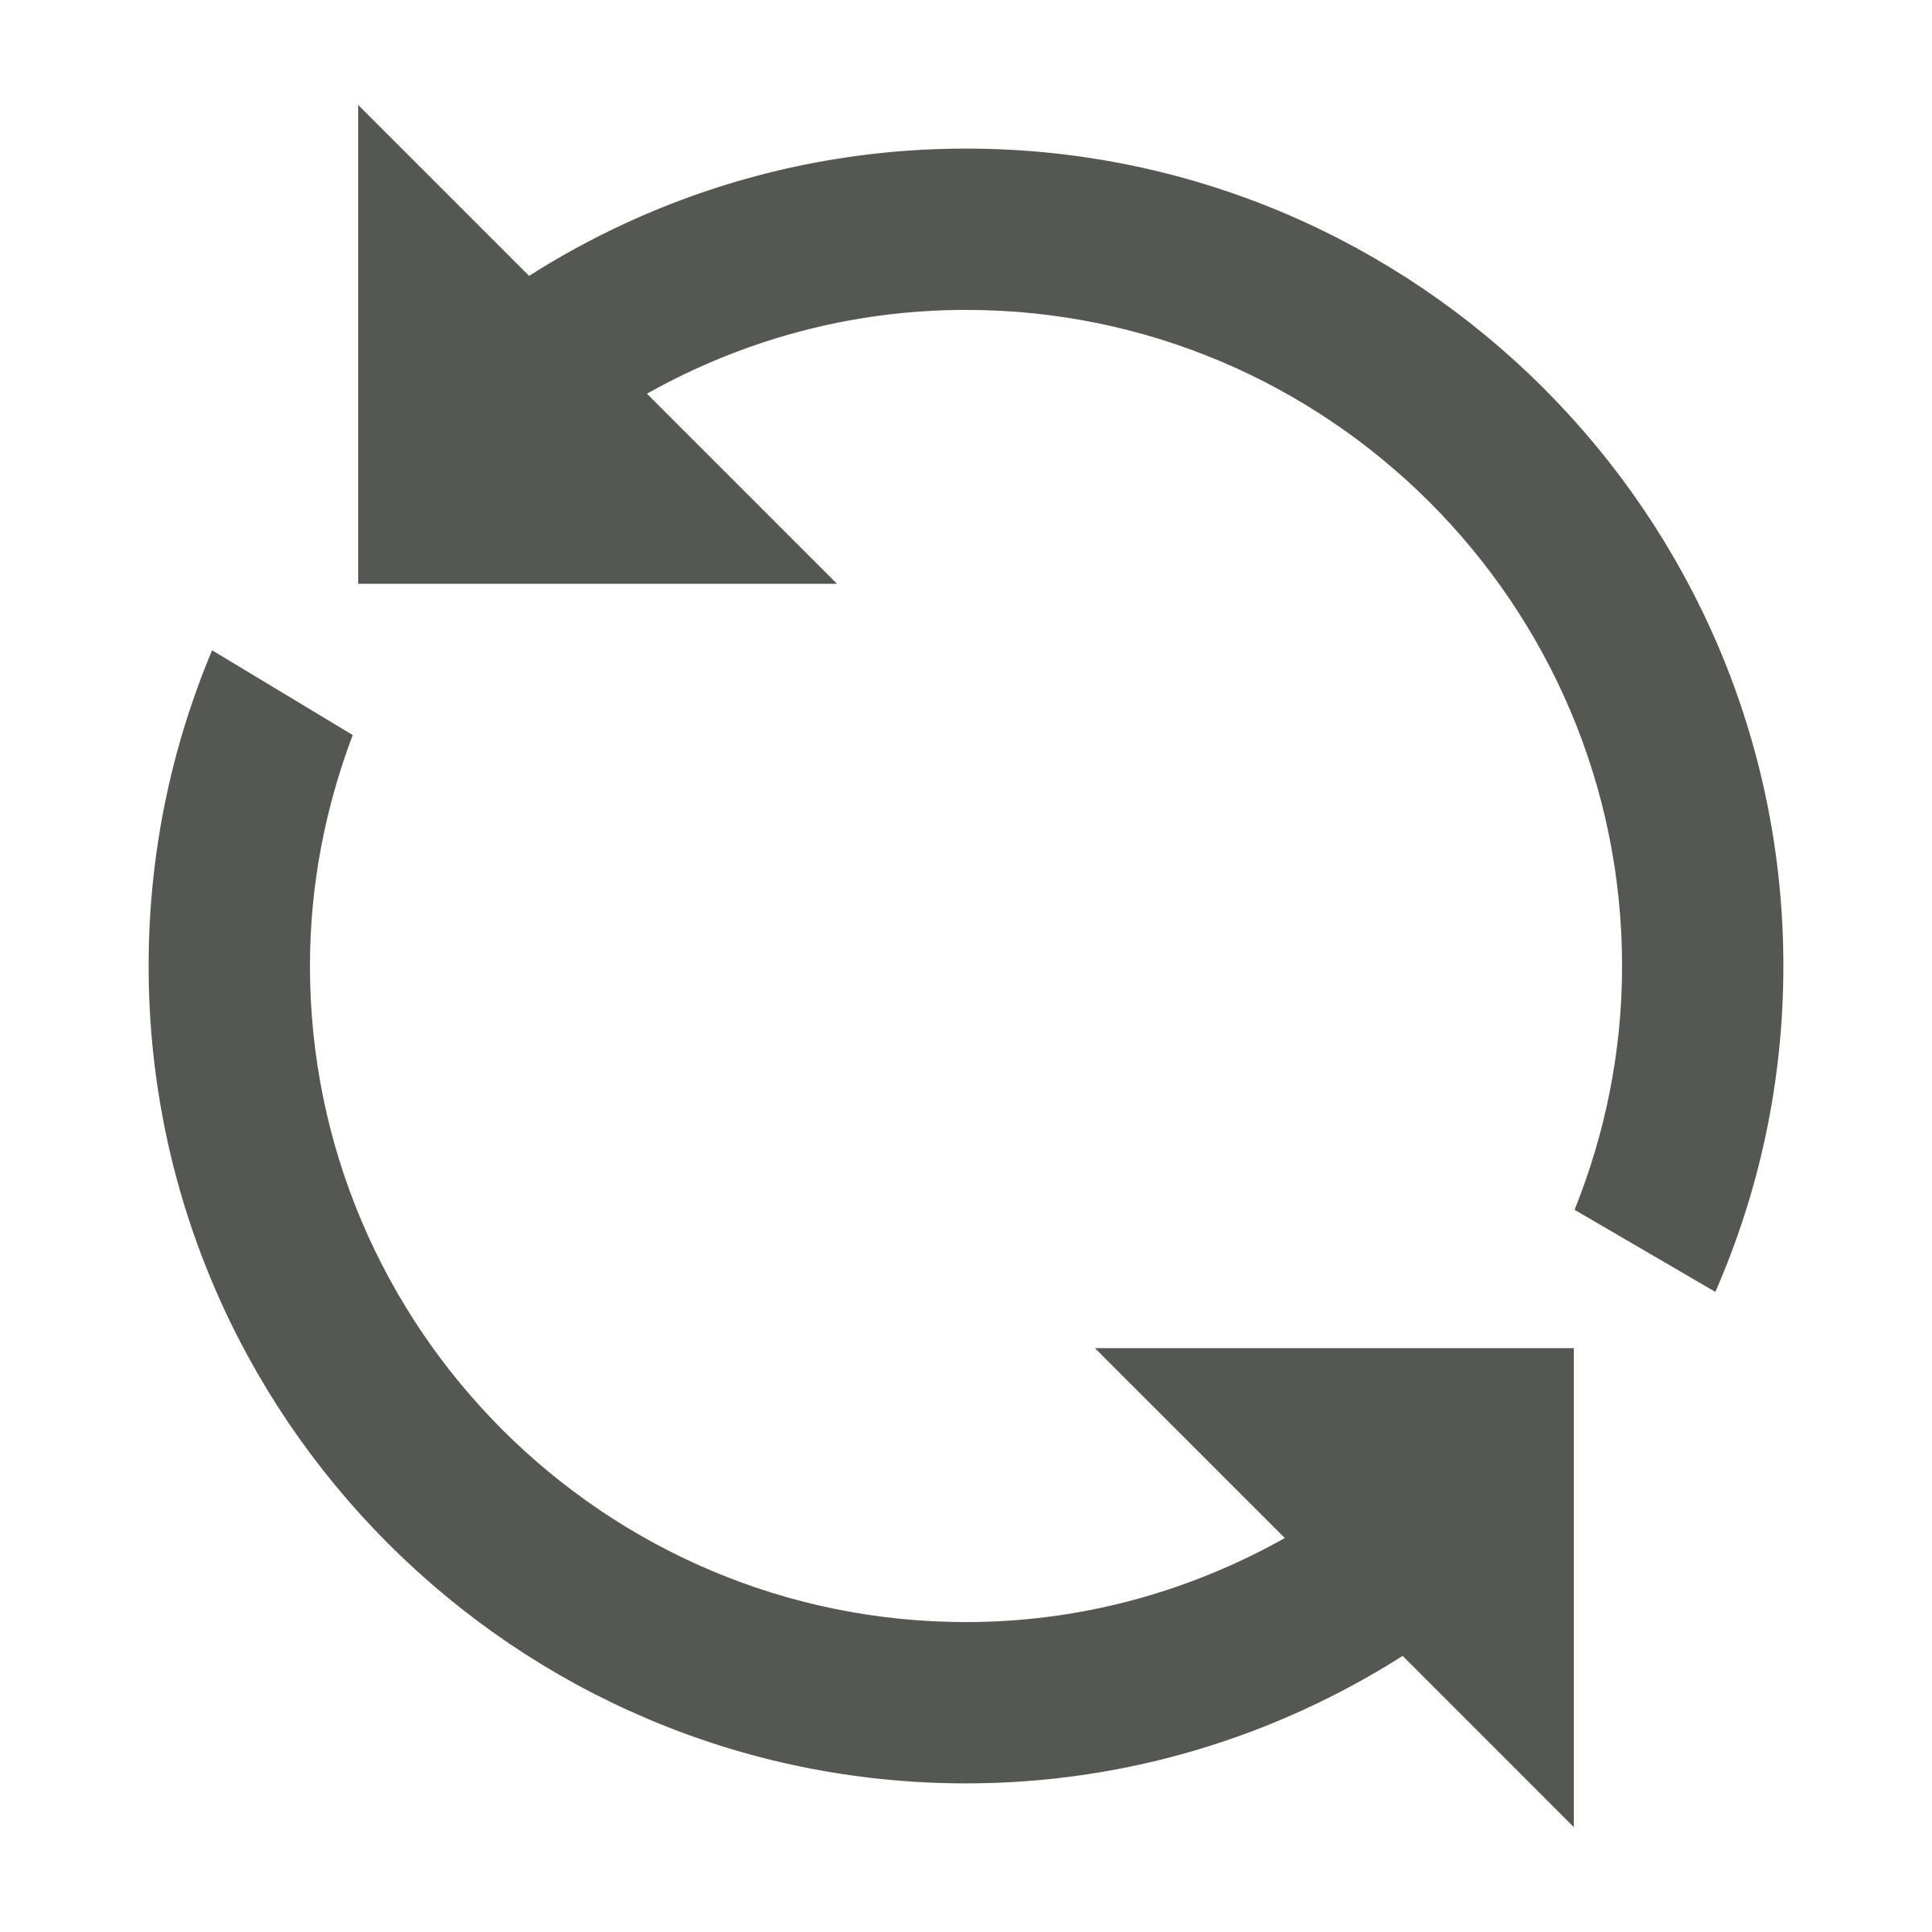 File:Refresh icon.png - Wikipedia, the free encyclopedia